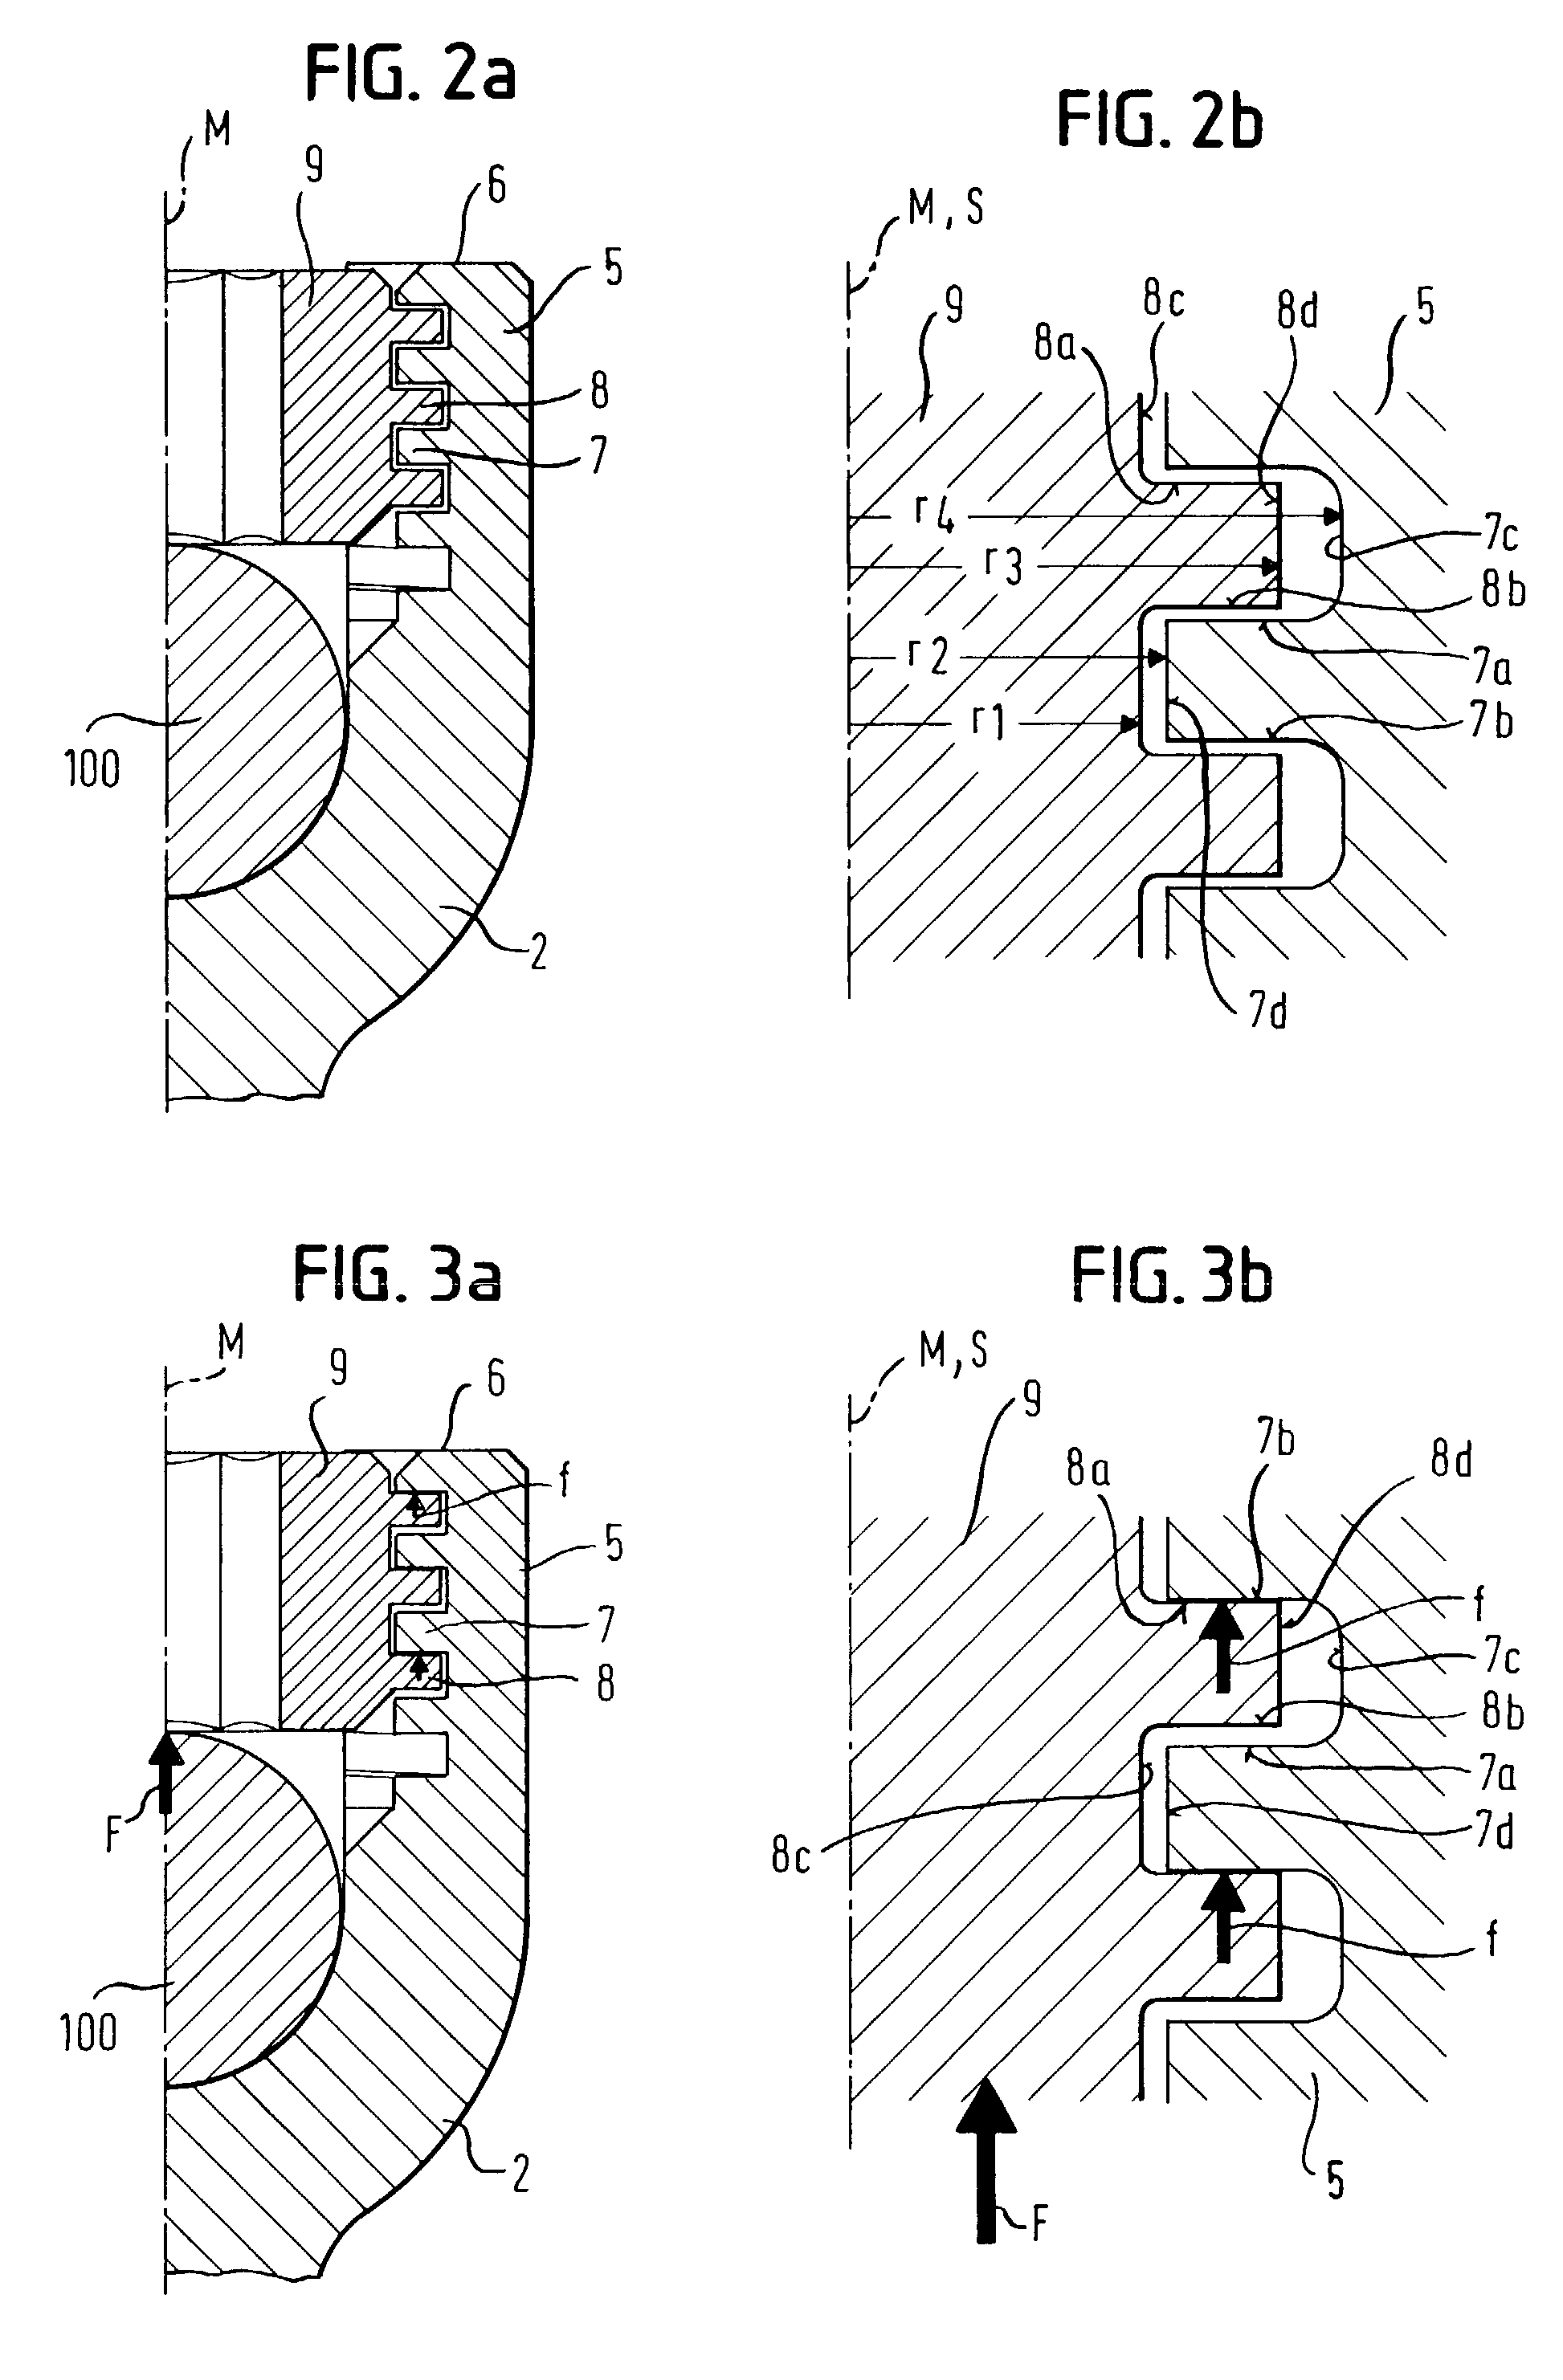 Element with a shank and a holding element connected to it for connecting to a rod